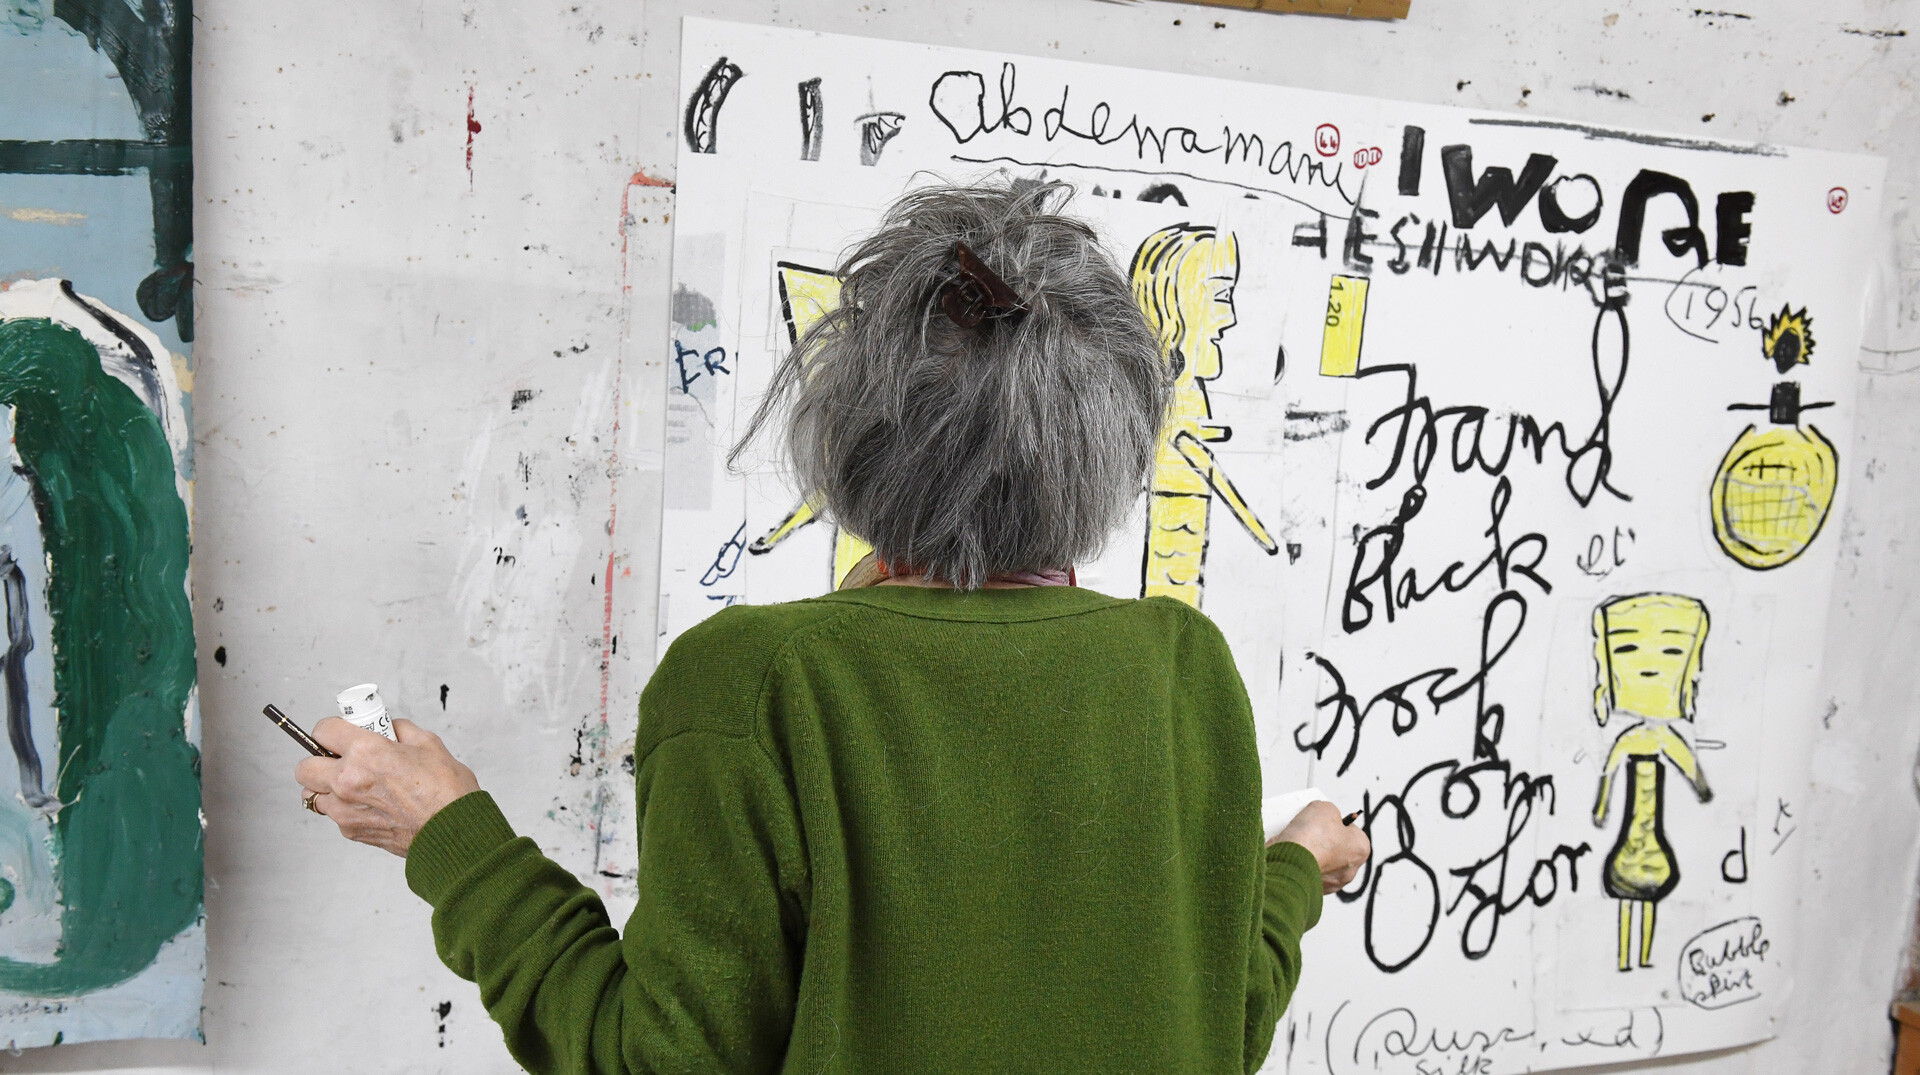 A photo of Rose Wylie at work in her studio, dated 2020.